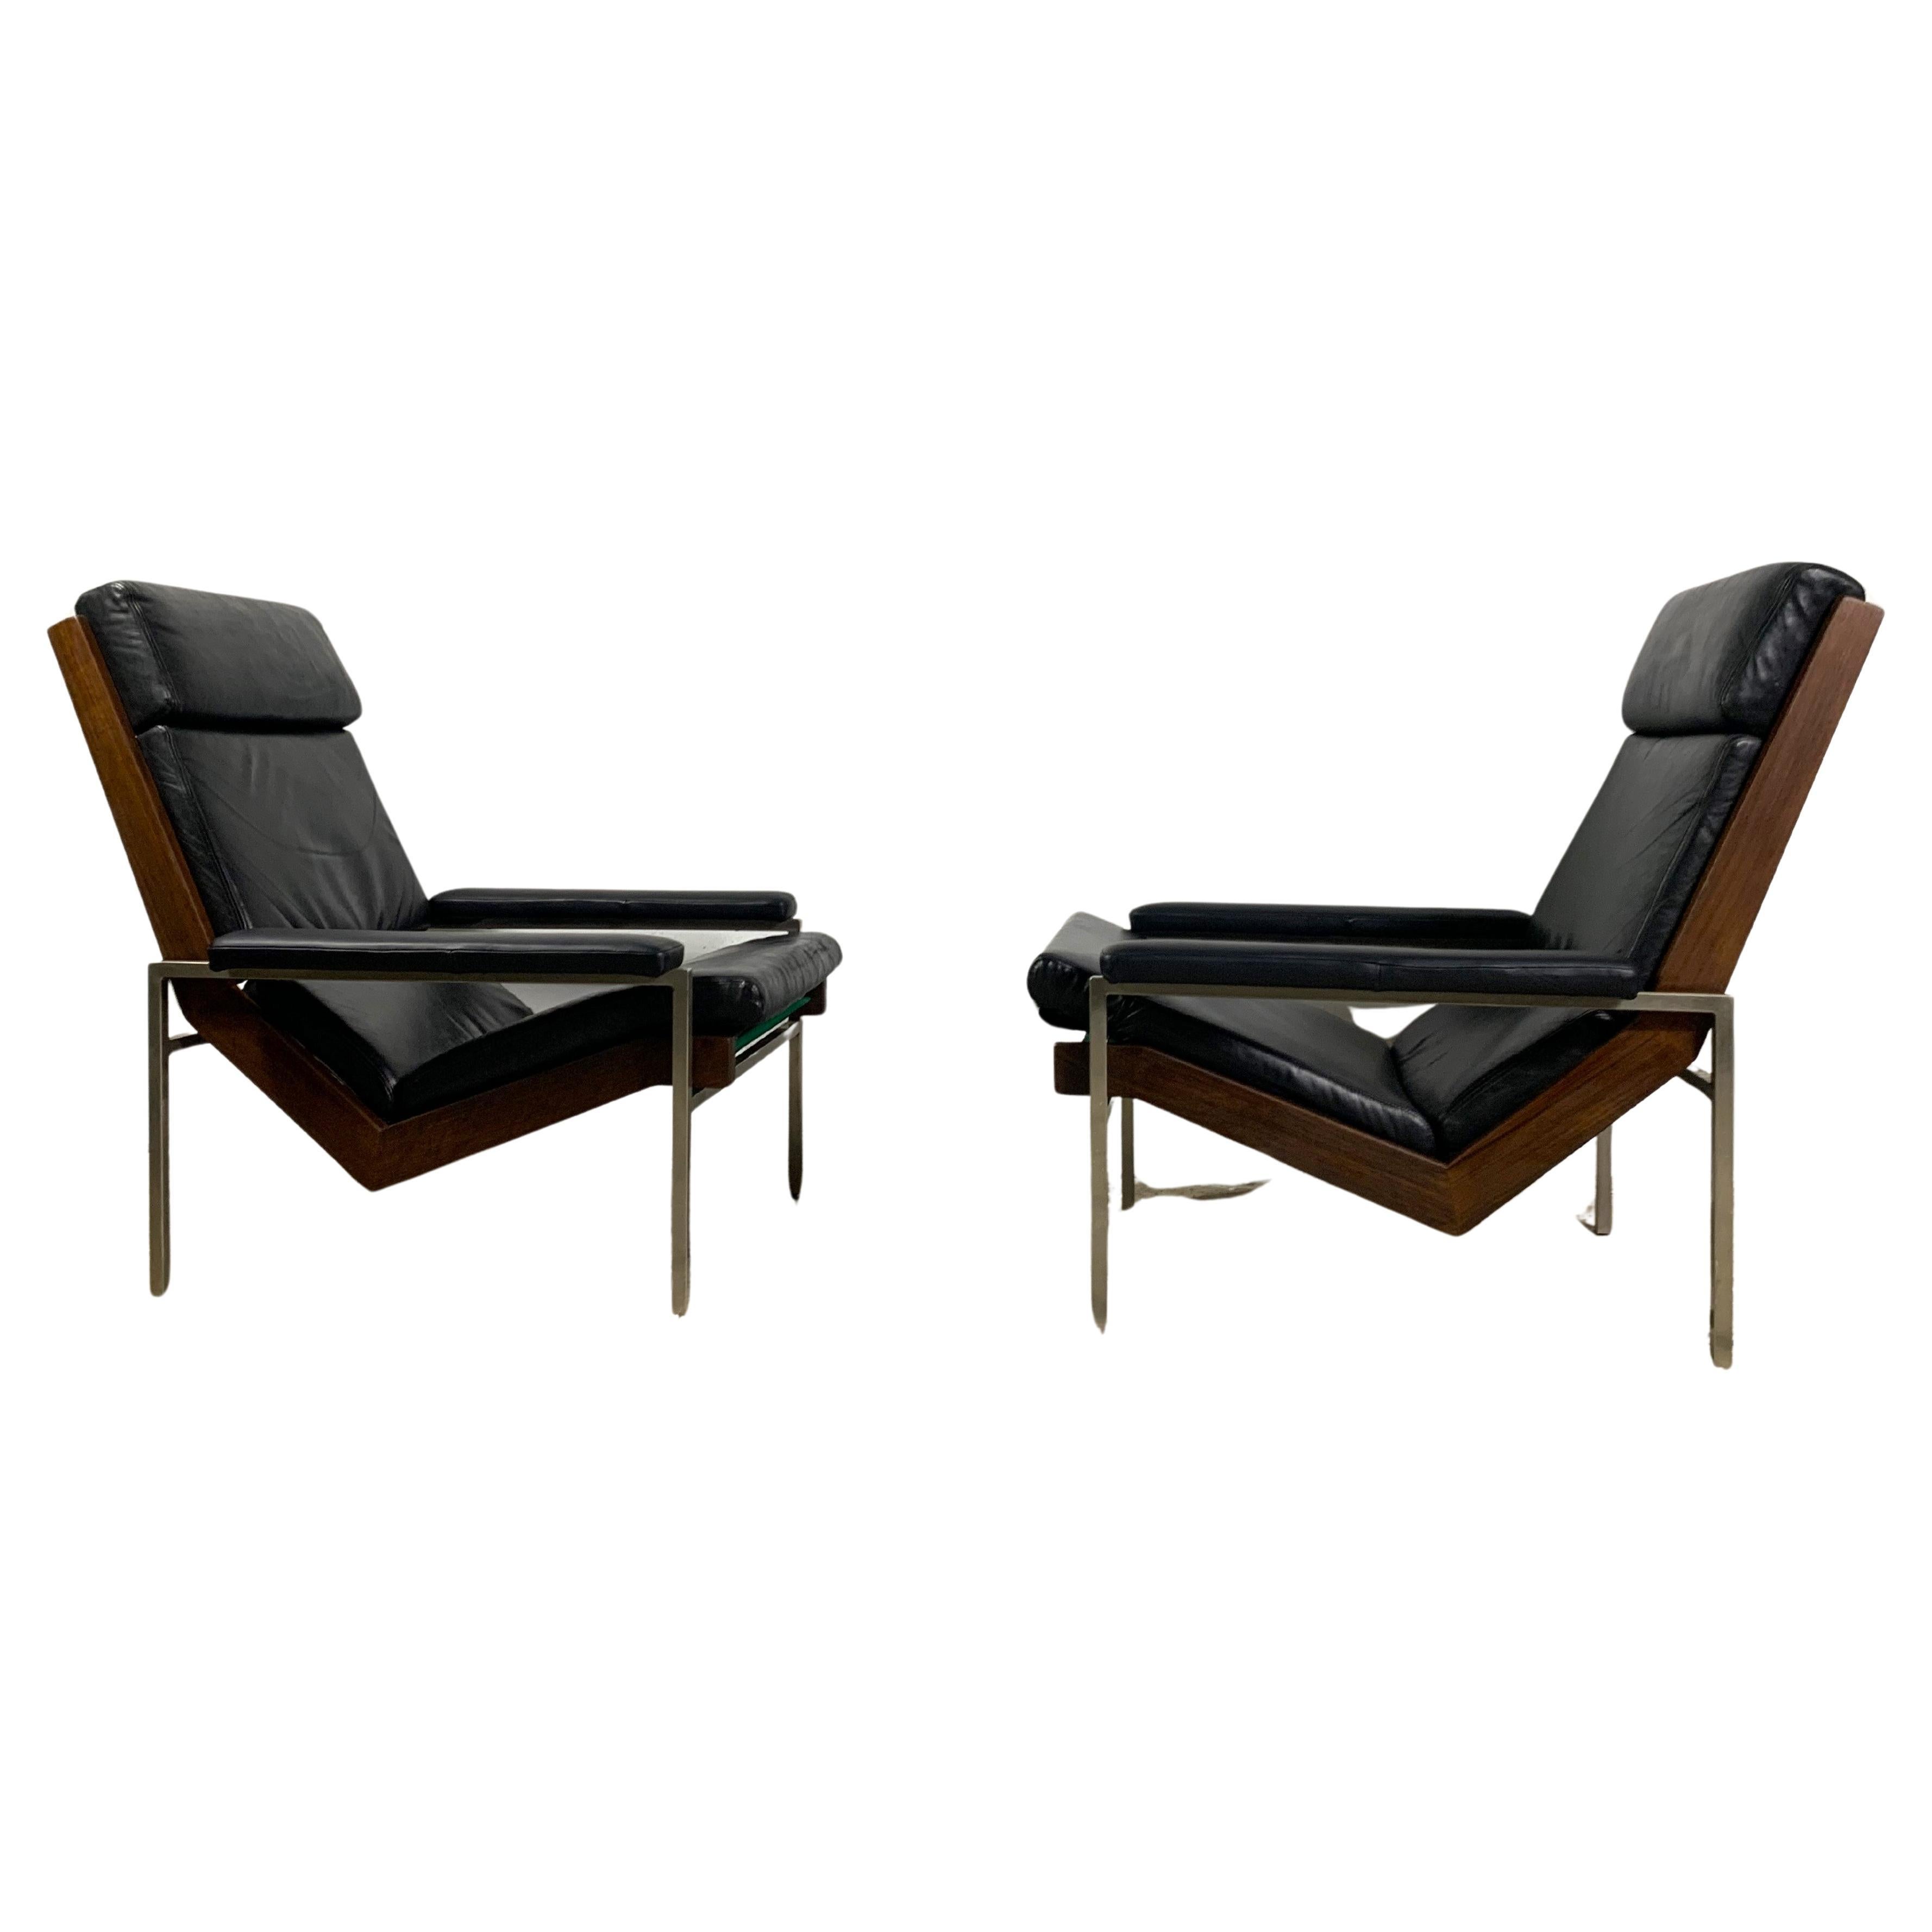 Rob Parry Lotus Armchairs, Rosewood And Leather, 1960s